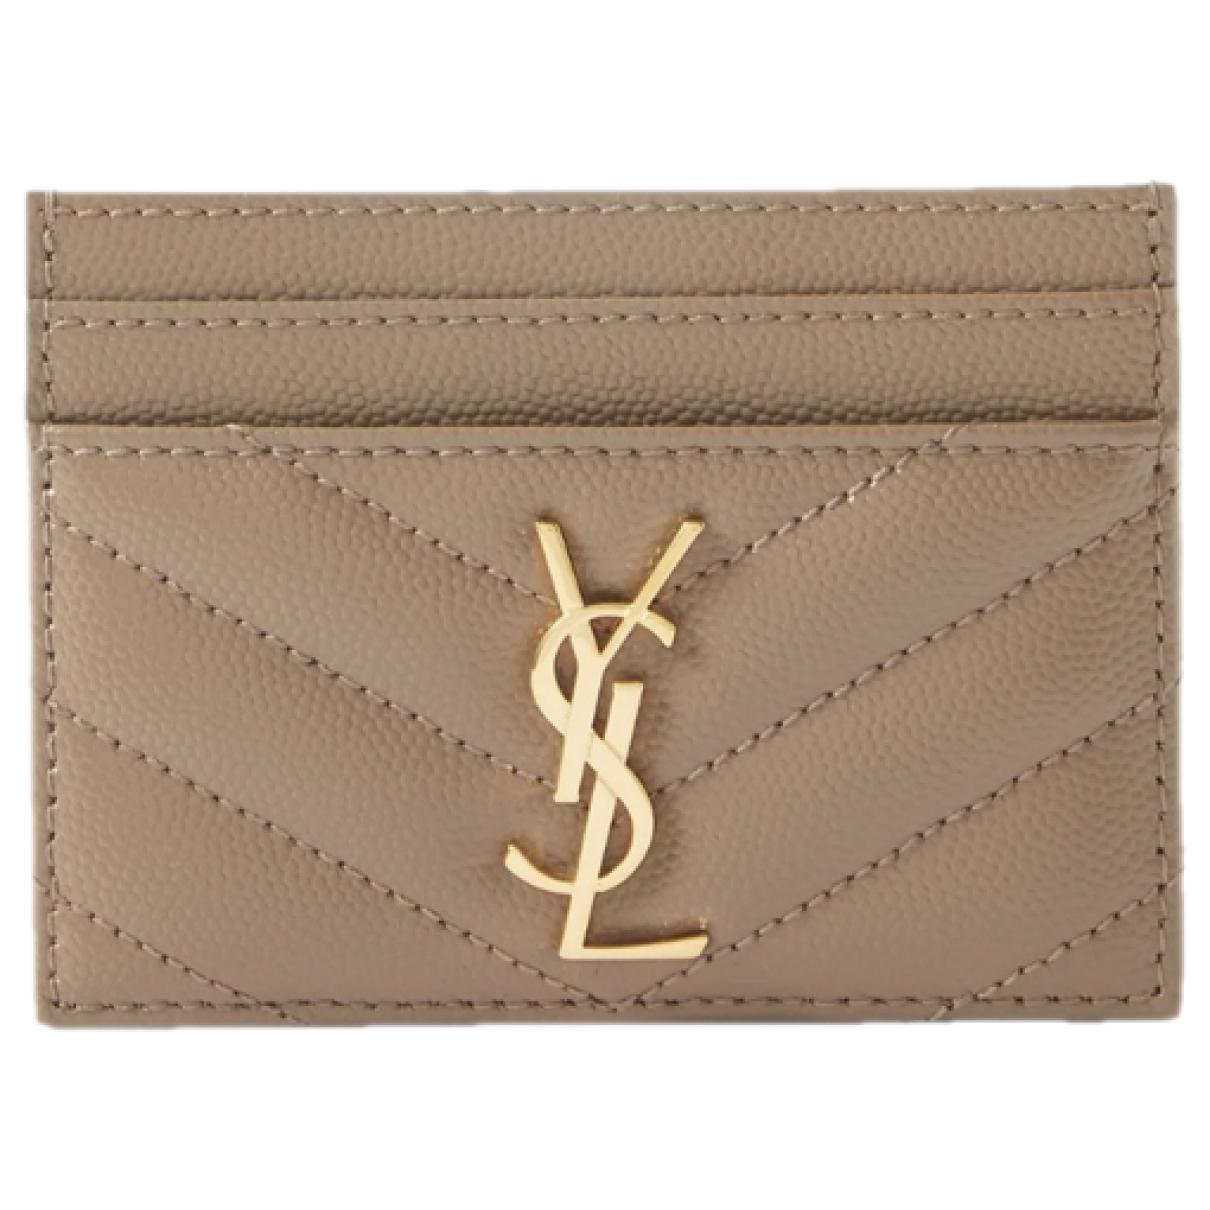 Monogramme leather wallet - 1